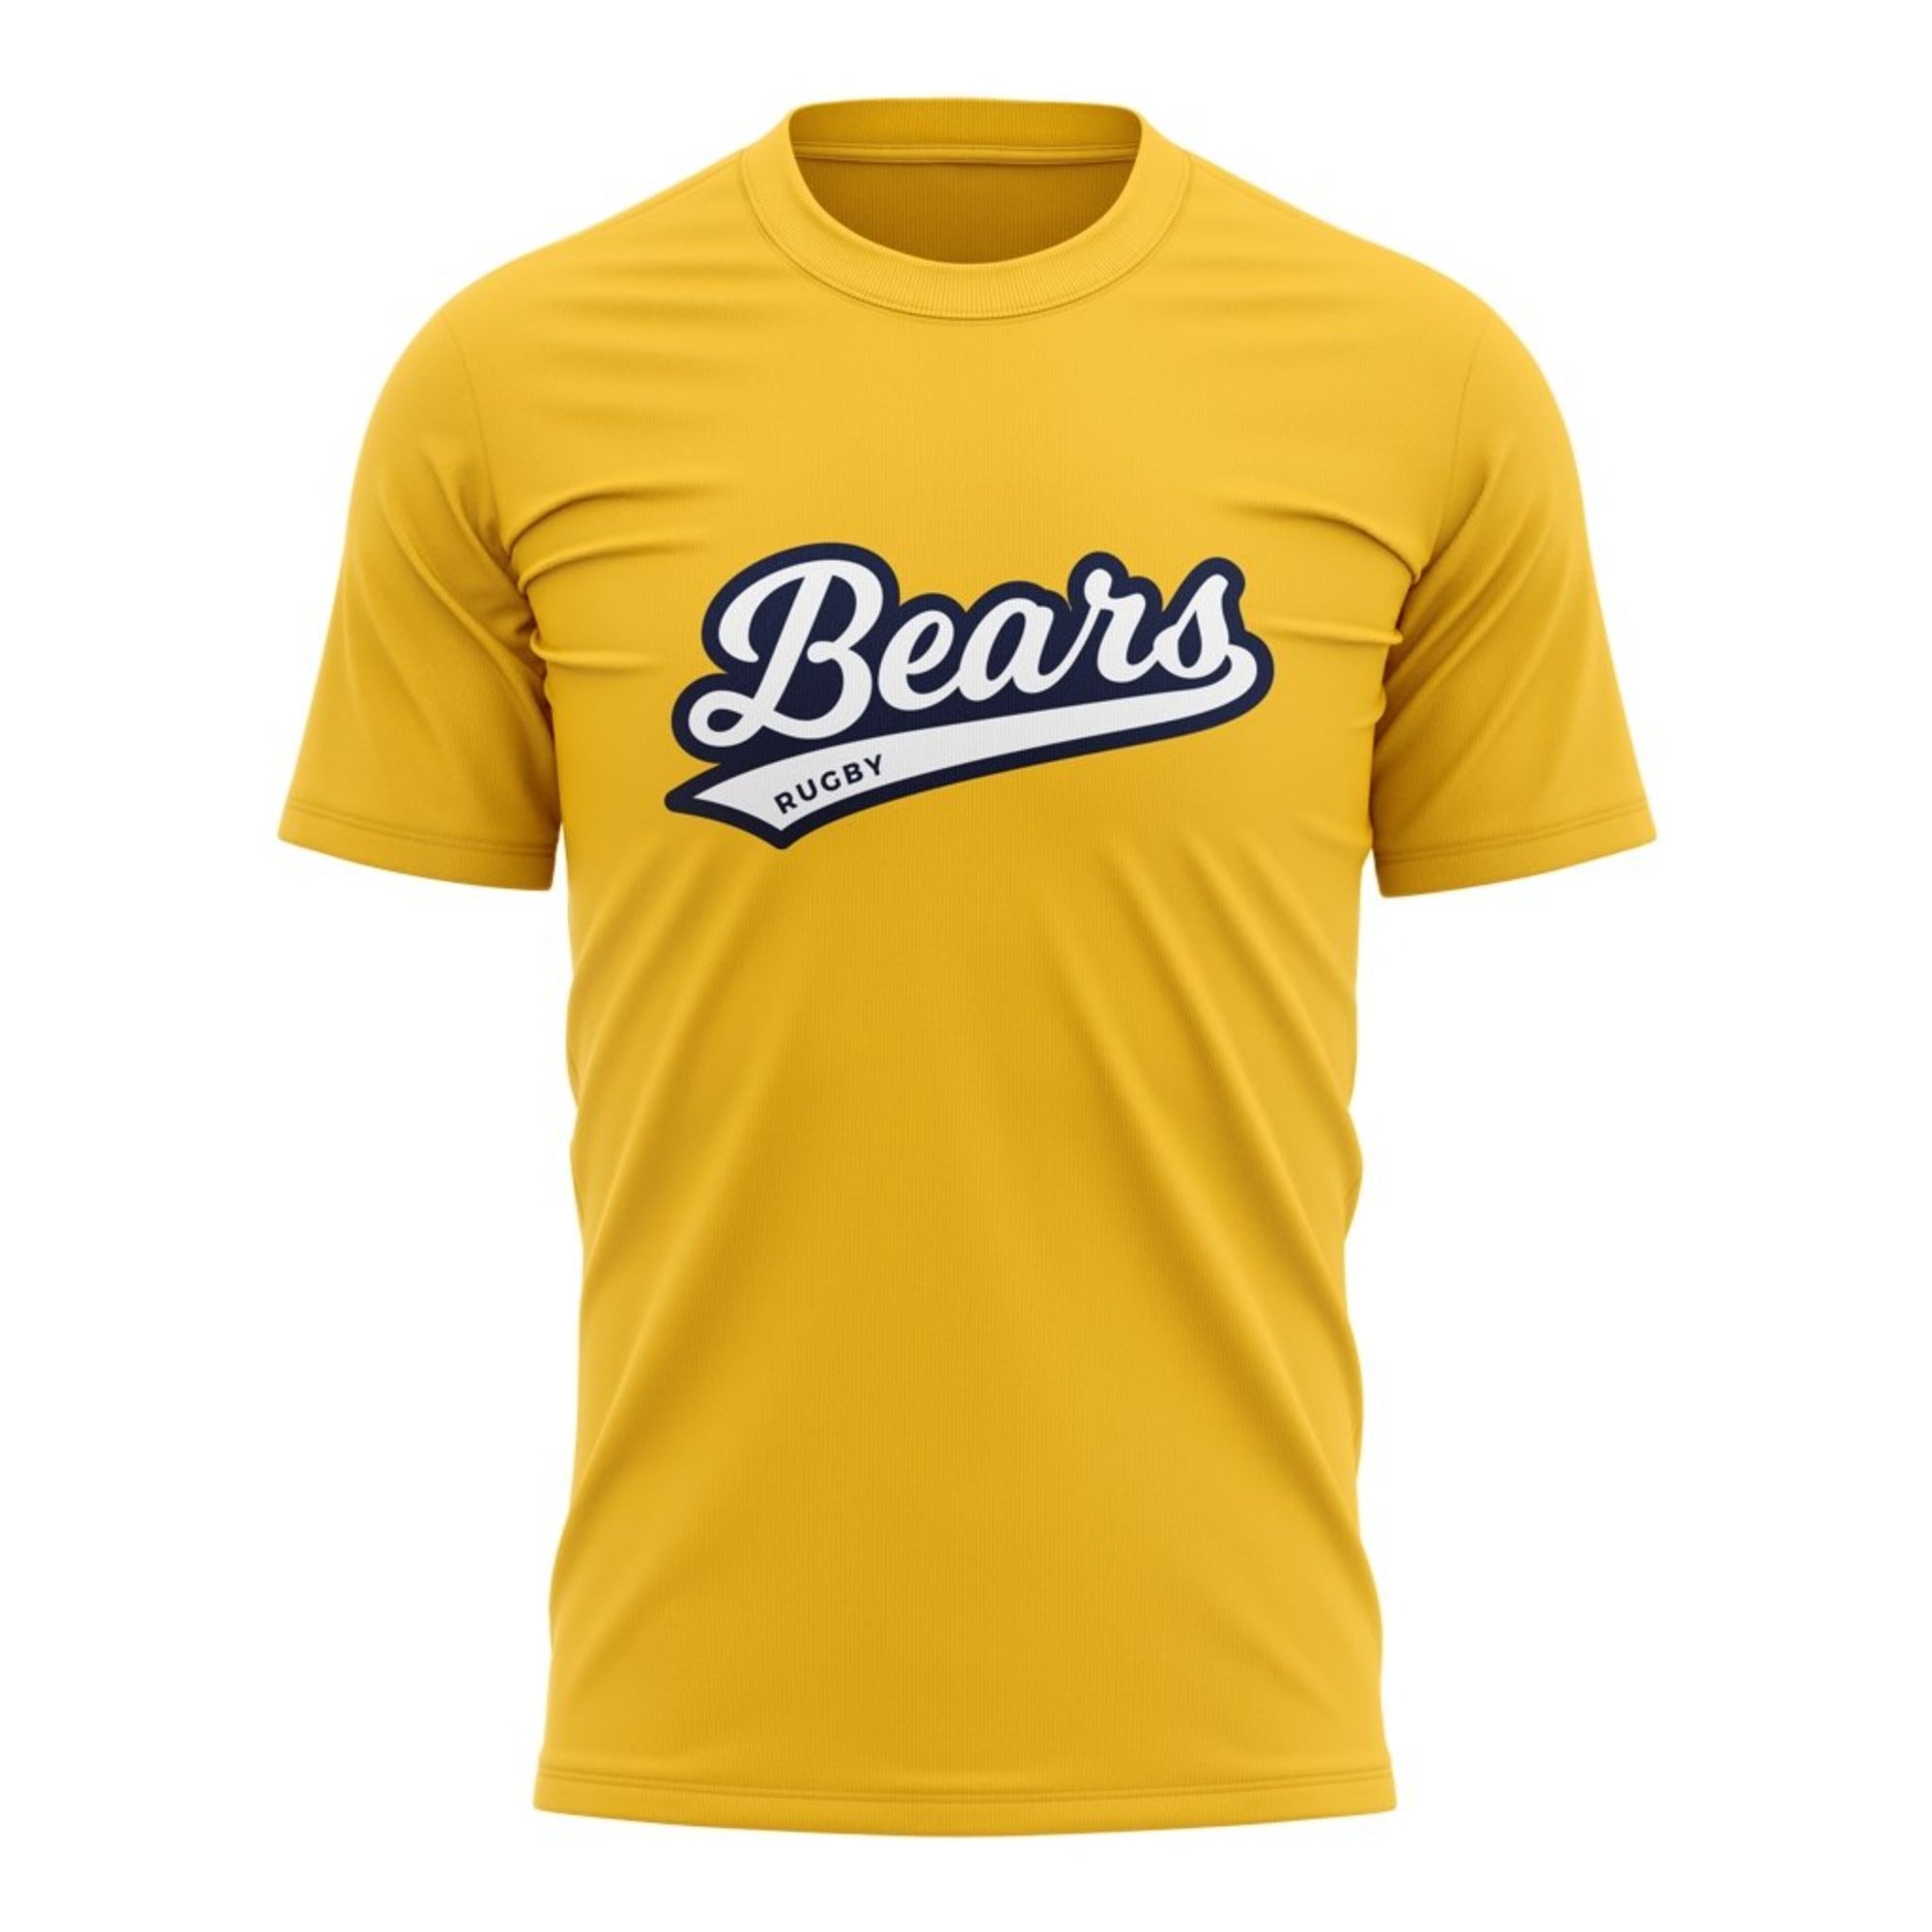 BC Rugby 2021 "Bears" Tee - Youth White/Gold - www.therugbyshop.com www.therugbyshop.com YOUTH / WHITE / XS XIX Brands TEES BC Rugby 2021 "Bears" Tee - Youth White/Gold